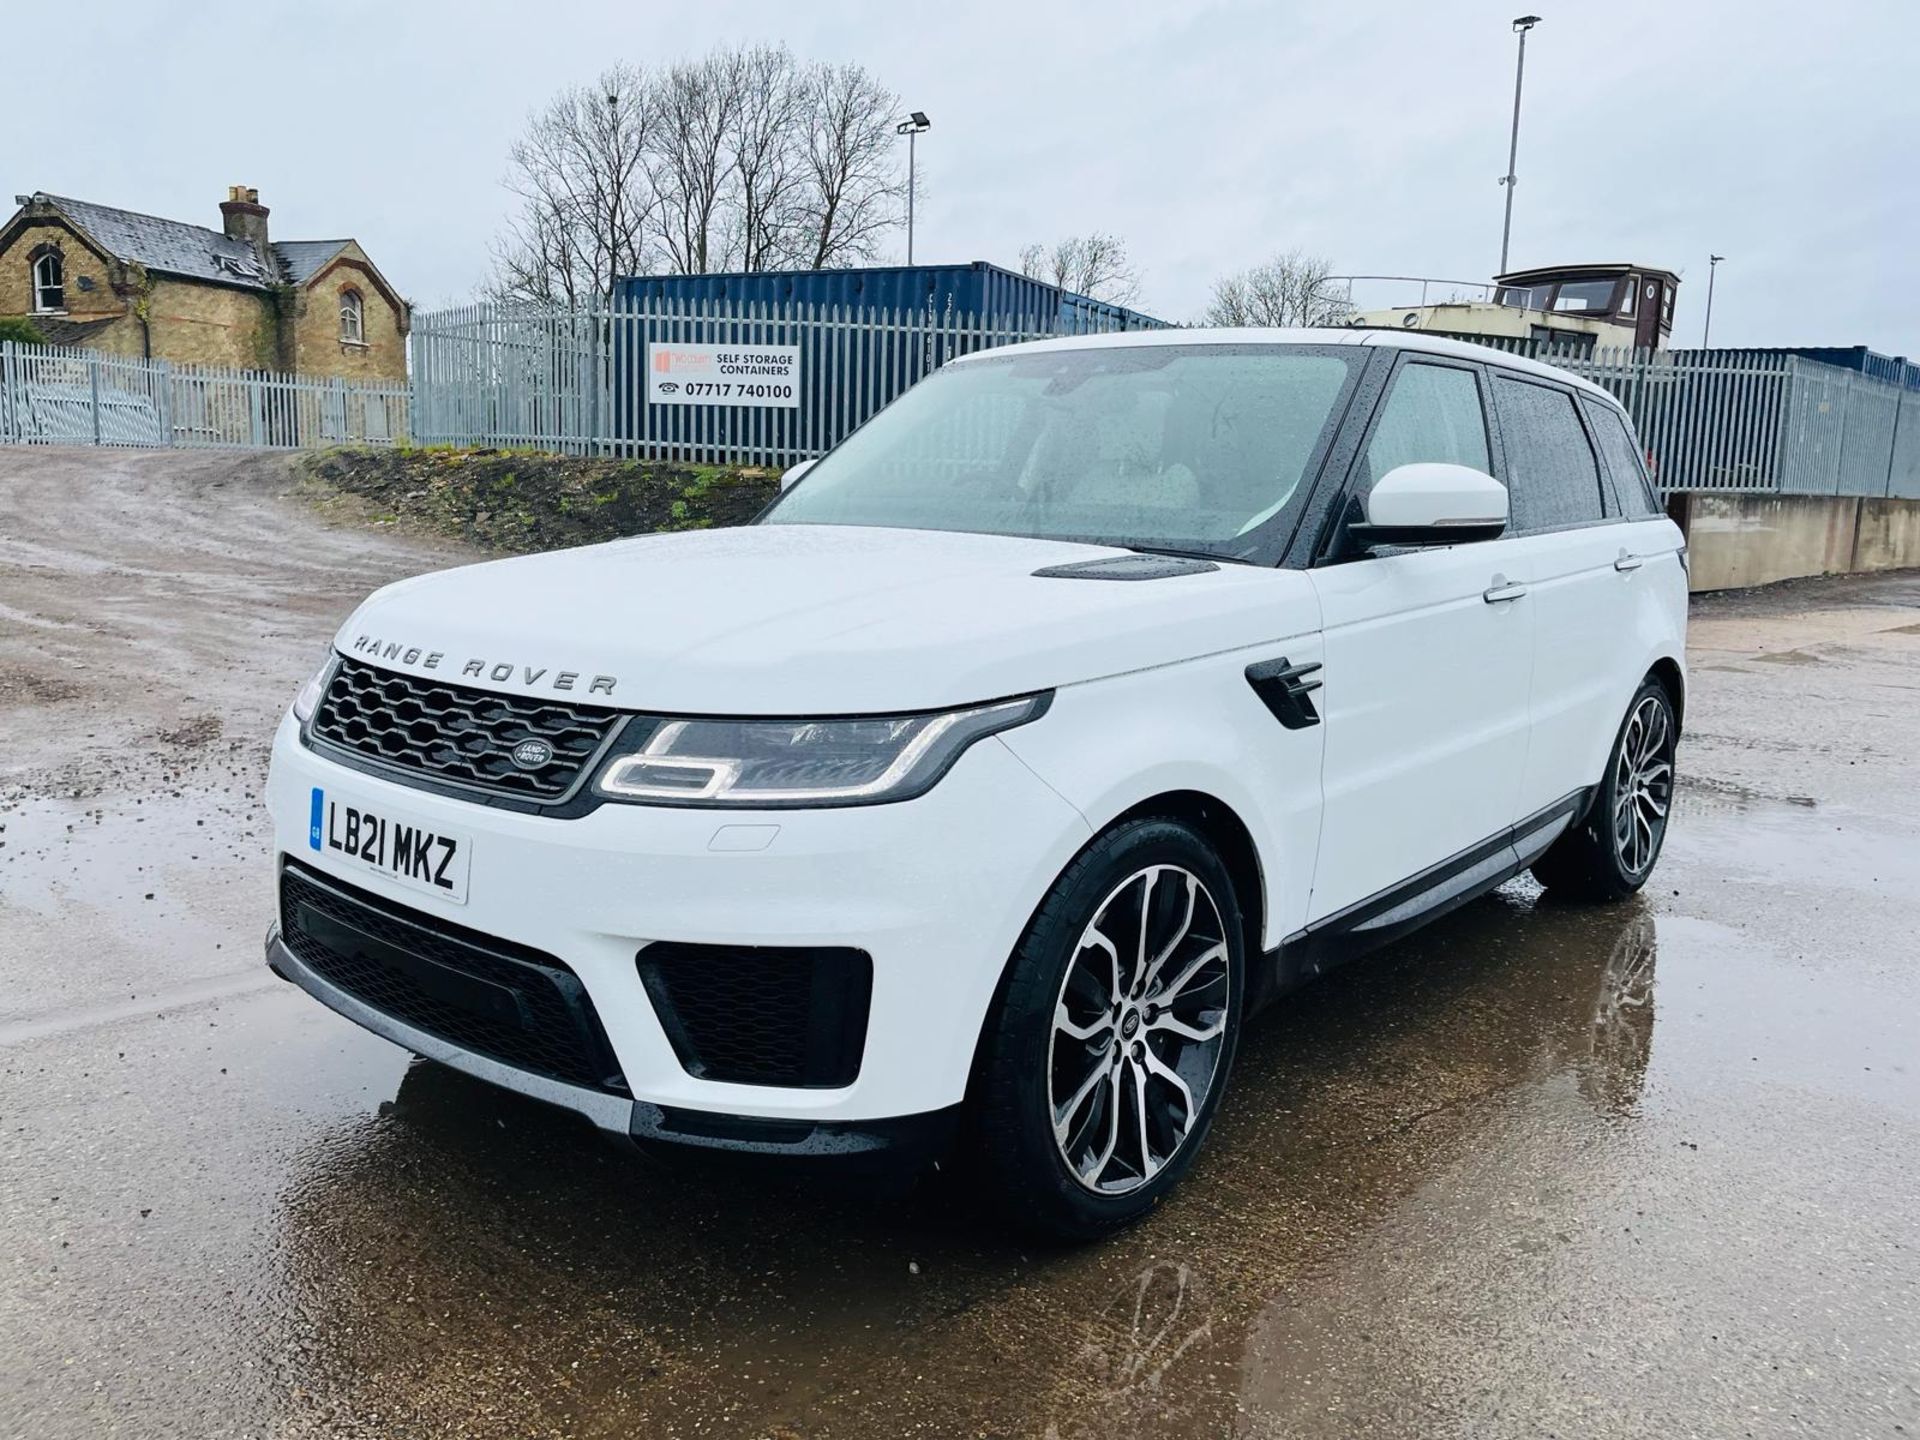 ** ON SALE ** Land Rover Range Rover Sport 2.0 P400E HSE Hybrid 2021 '21 Reg' -Panoramic Roof- - Image 3 of 38